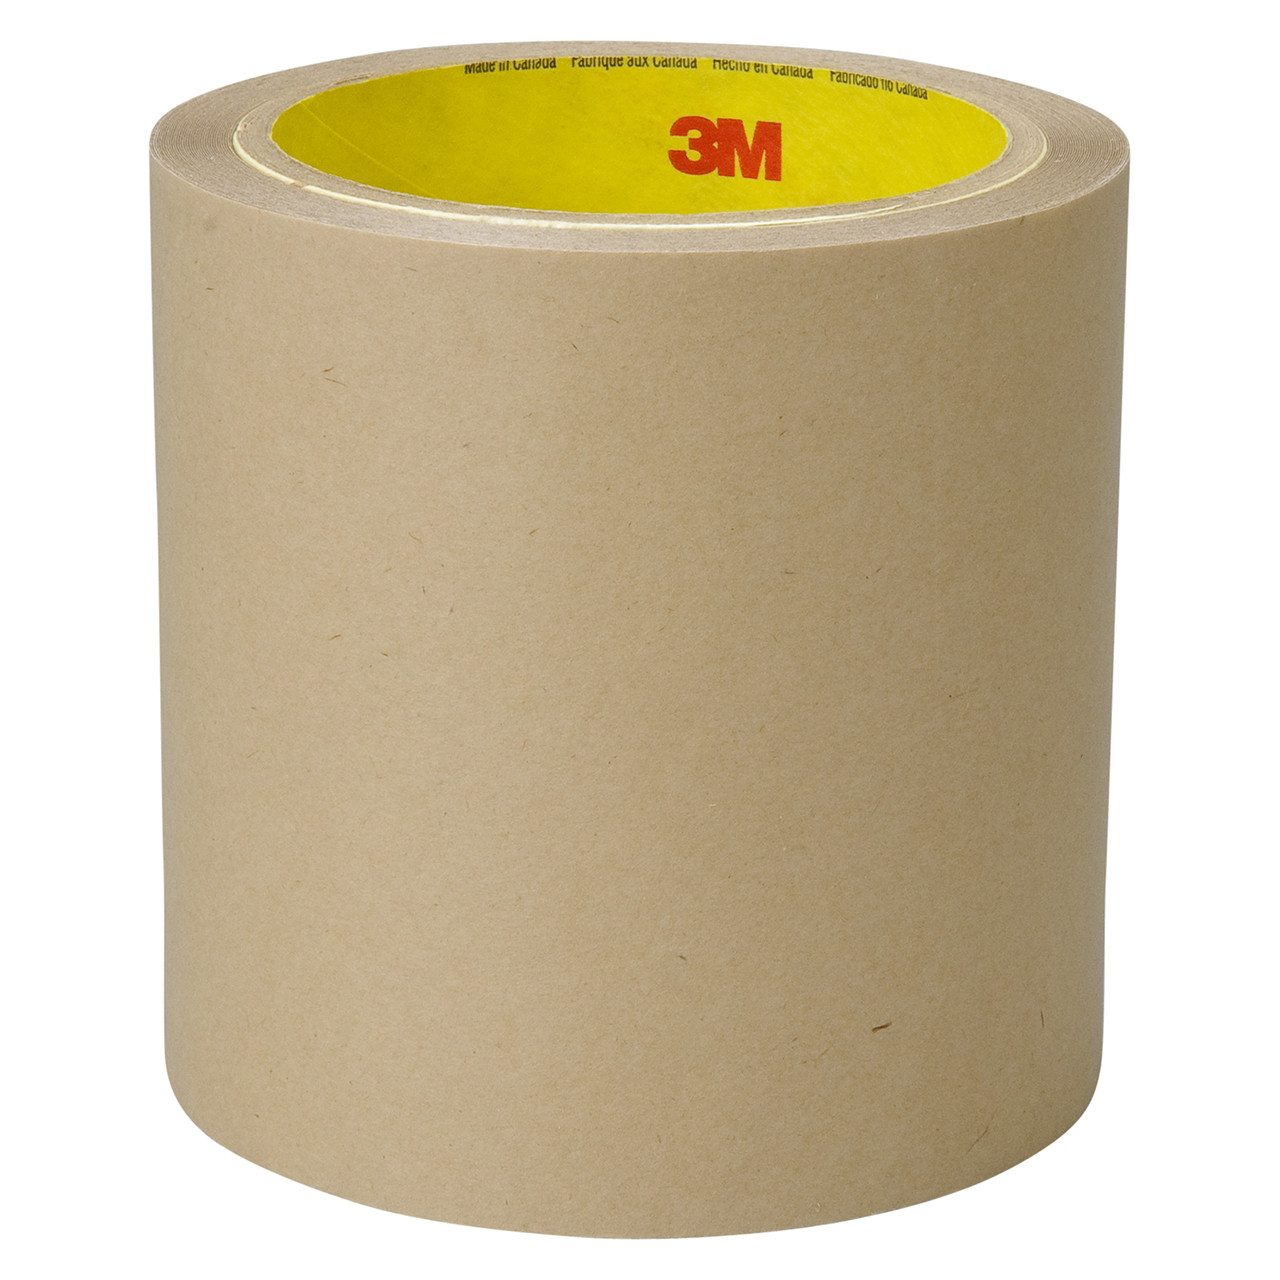 thin double sided tape Student Paper Tape Double- Sided Adhesive